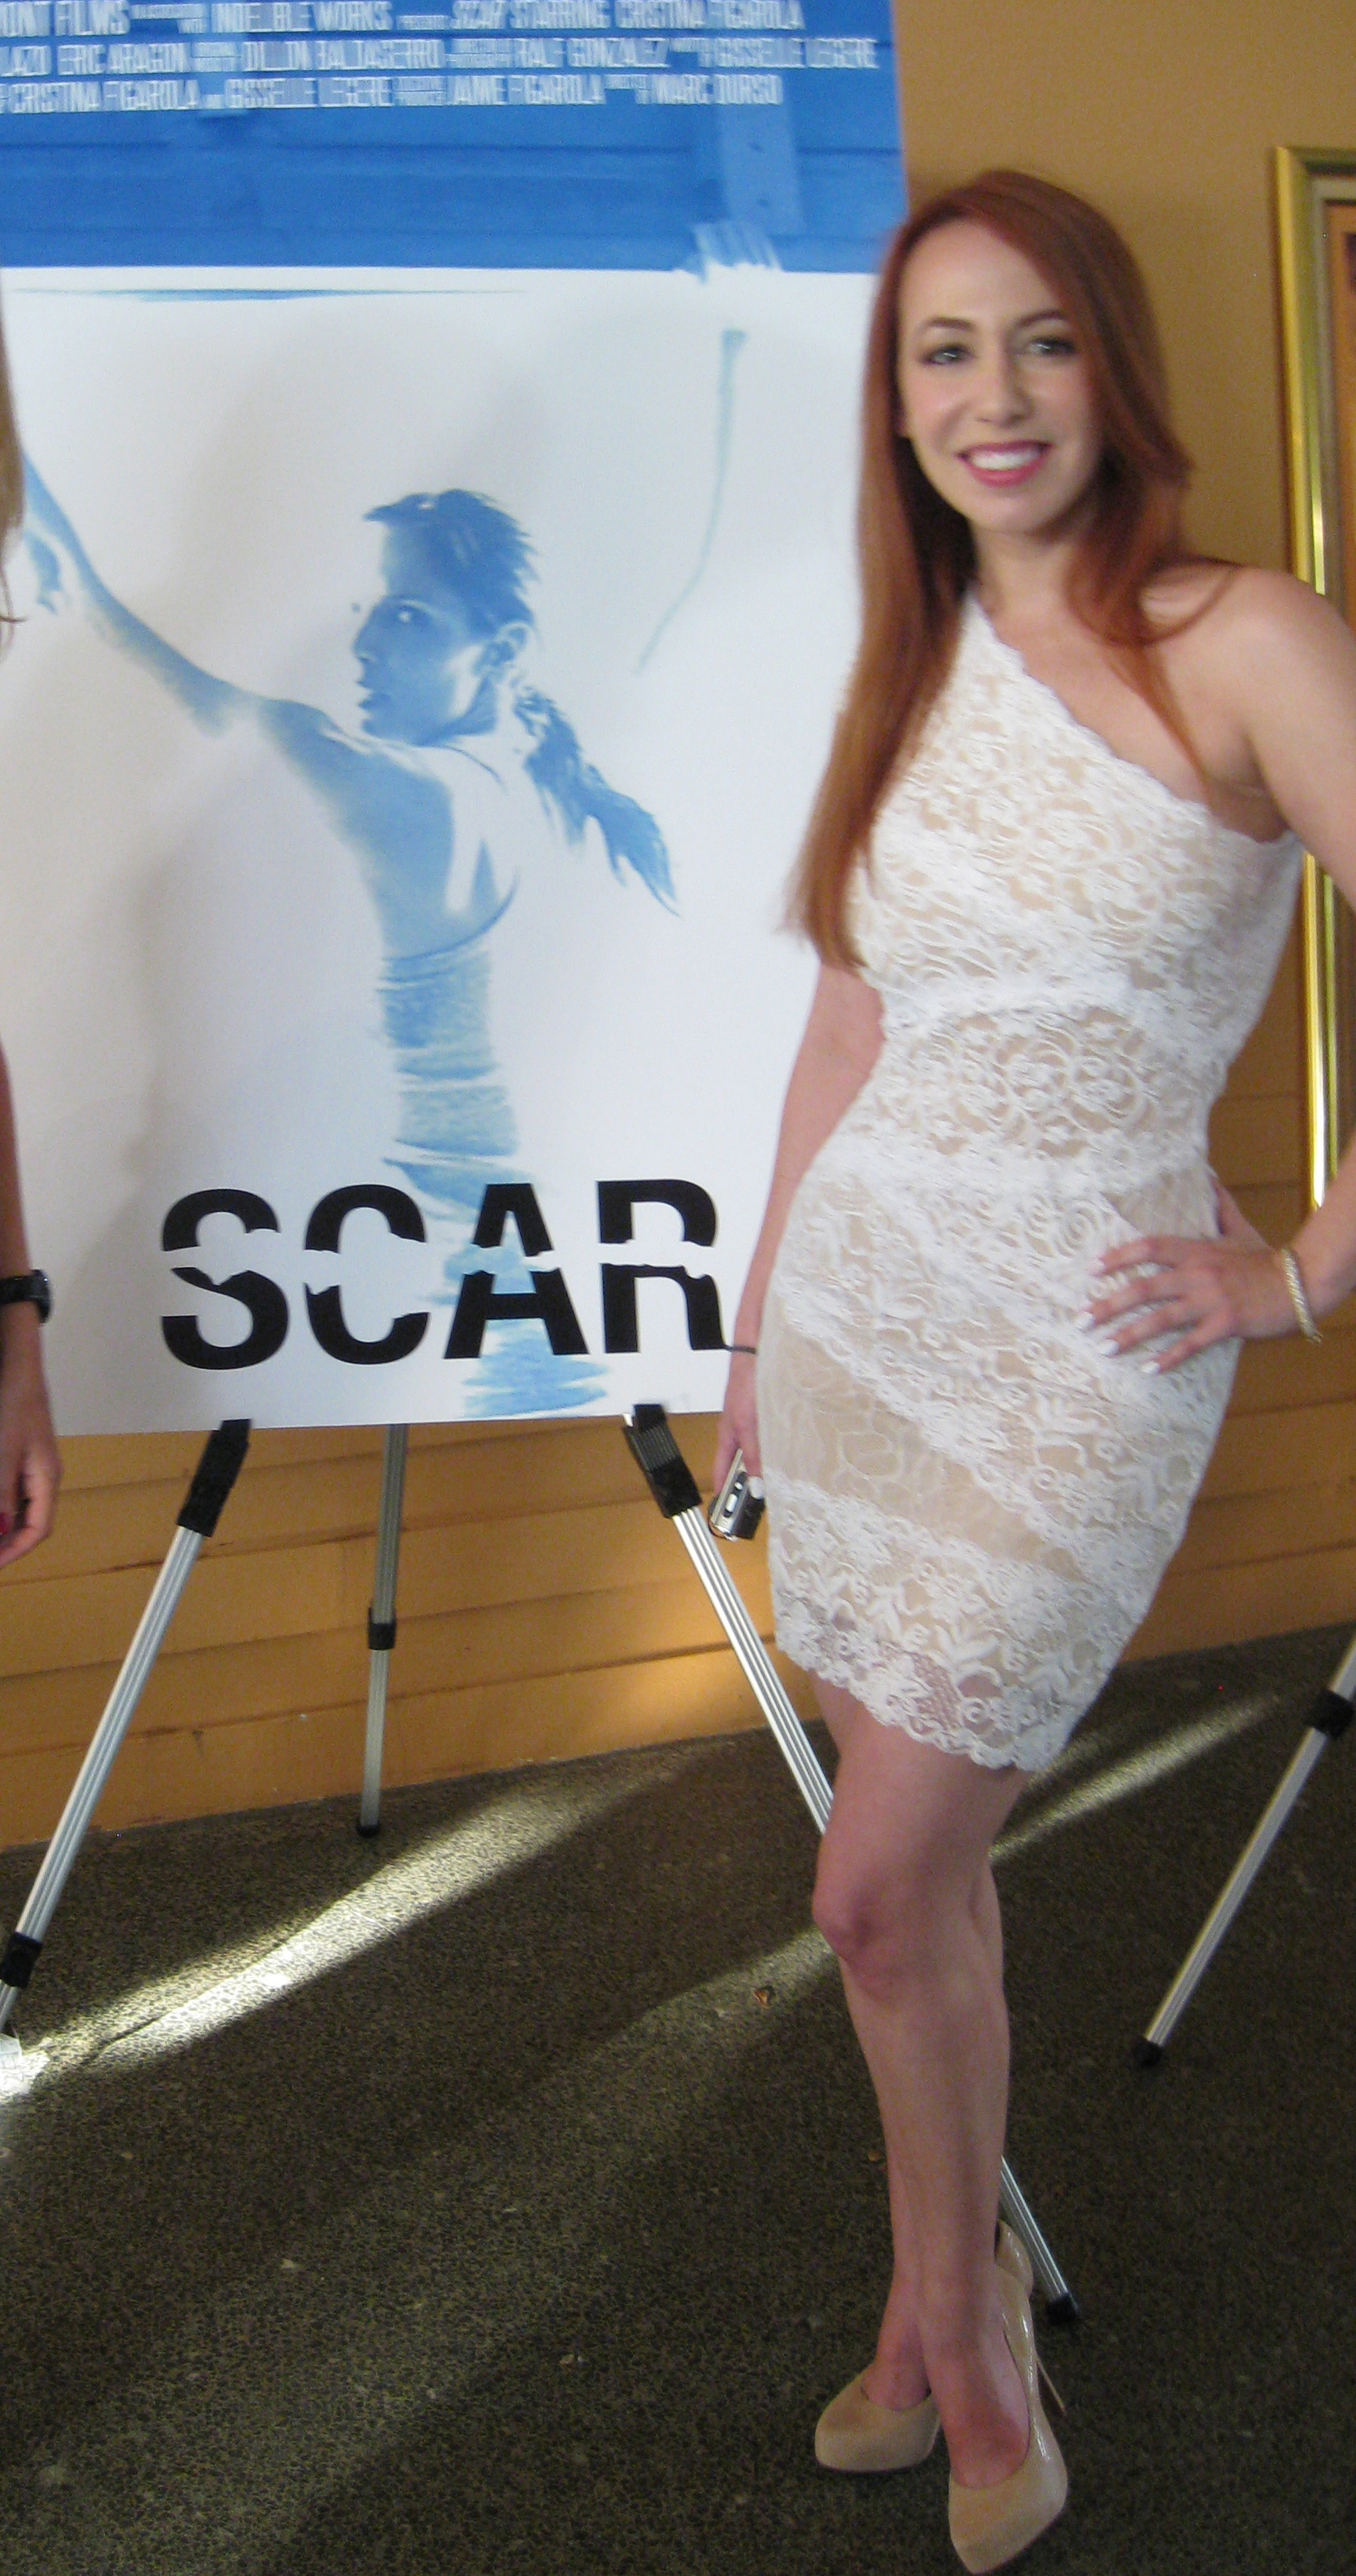 Gisselle Legere at the screening of SCAR, a film she wrote and produced